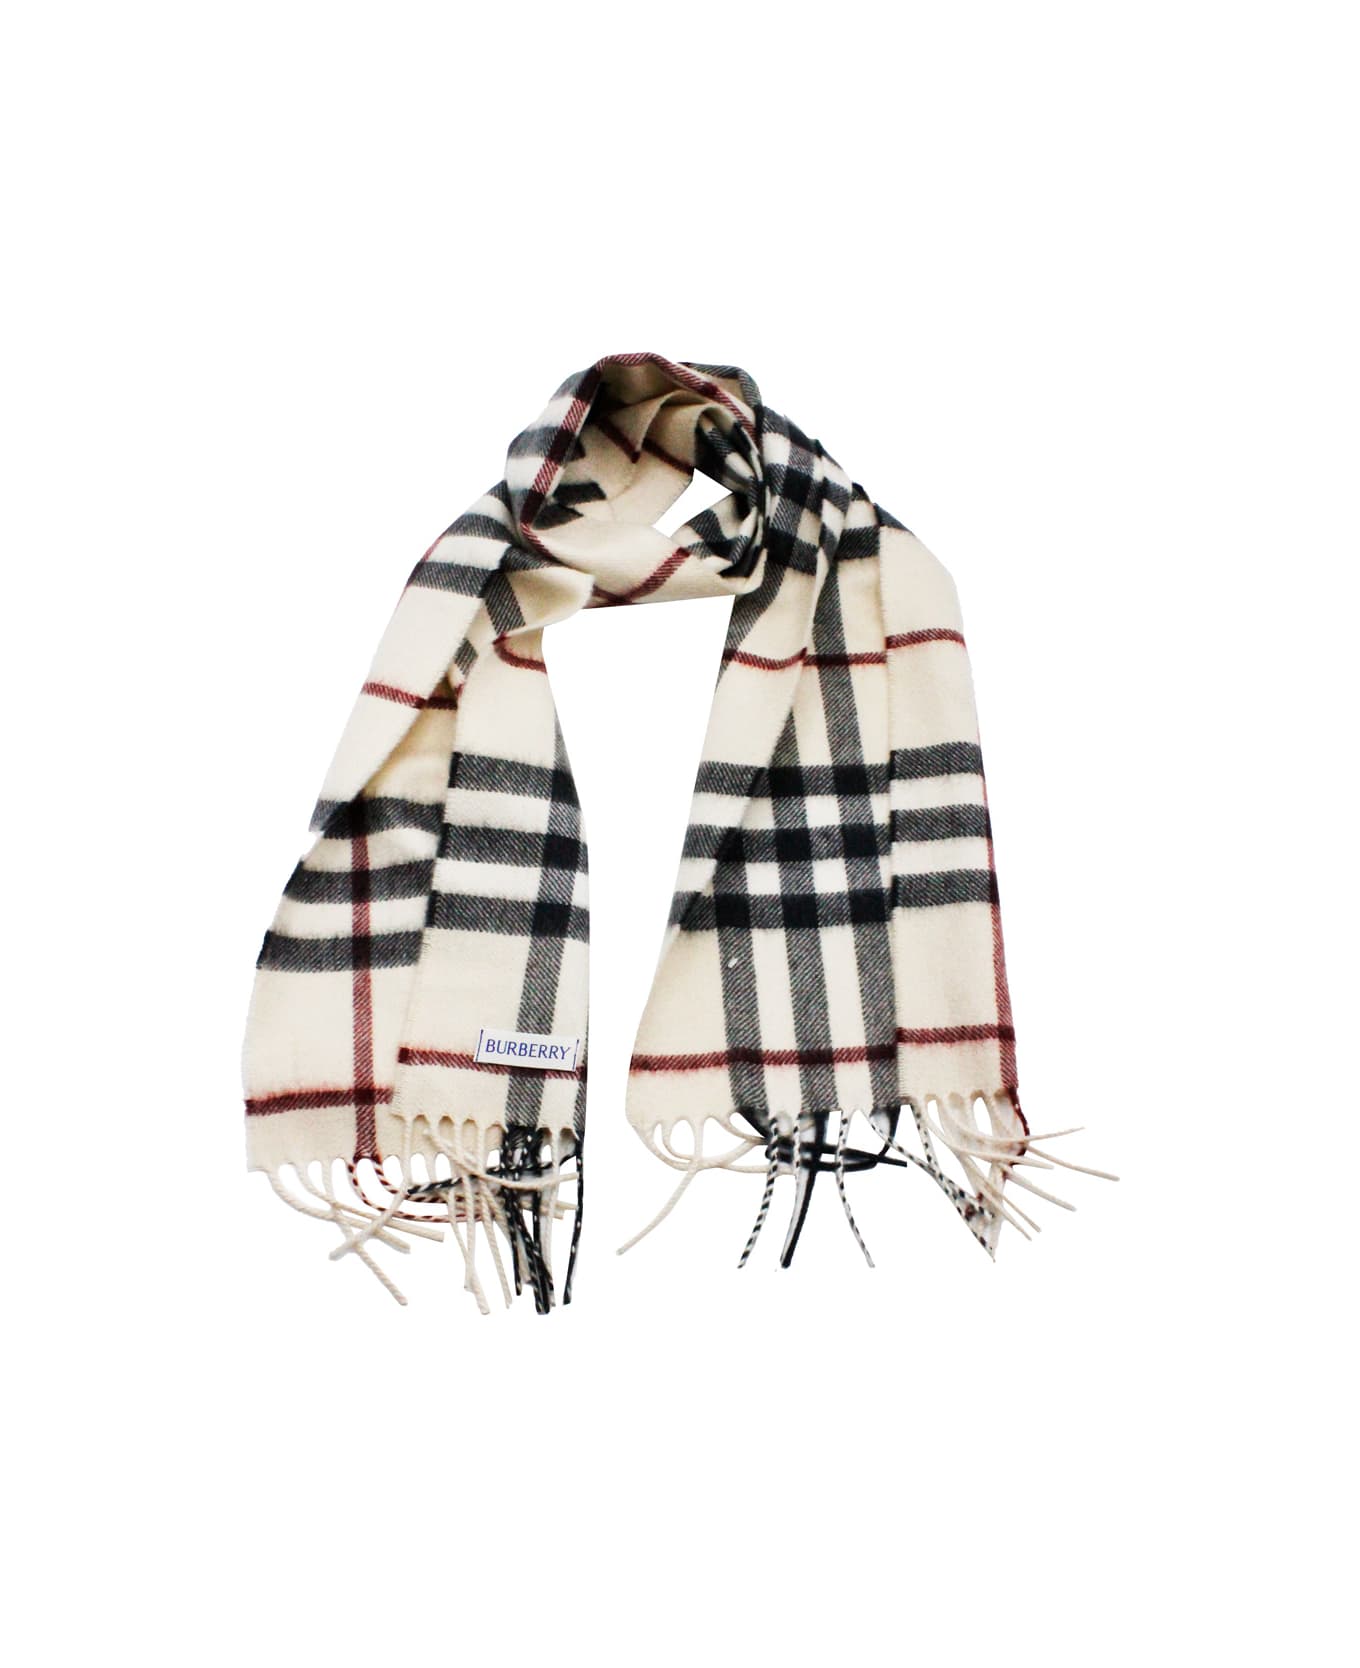 Burberry Scarf In Pure And Soft Cashmere With Check Pattern And Fringes At The Hem Measuring 130 X 20 - Stone アクセサリー＆ギフト